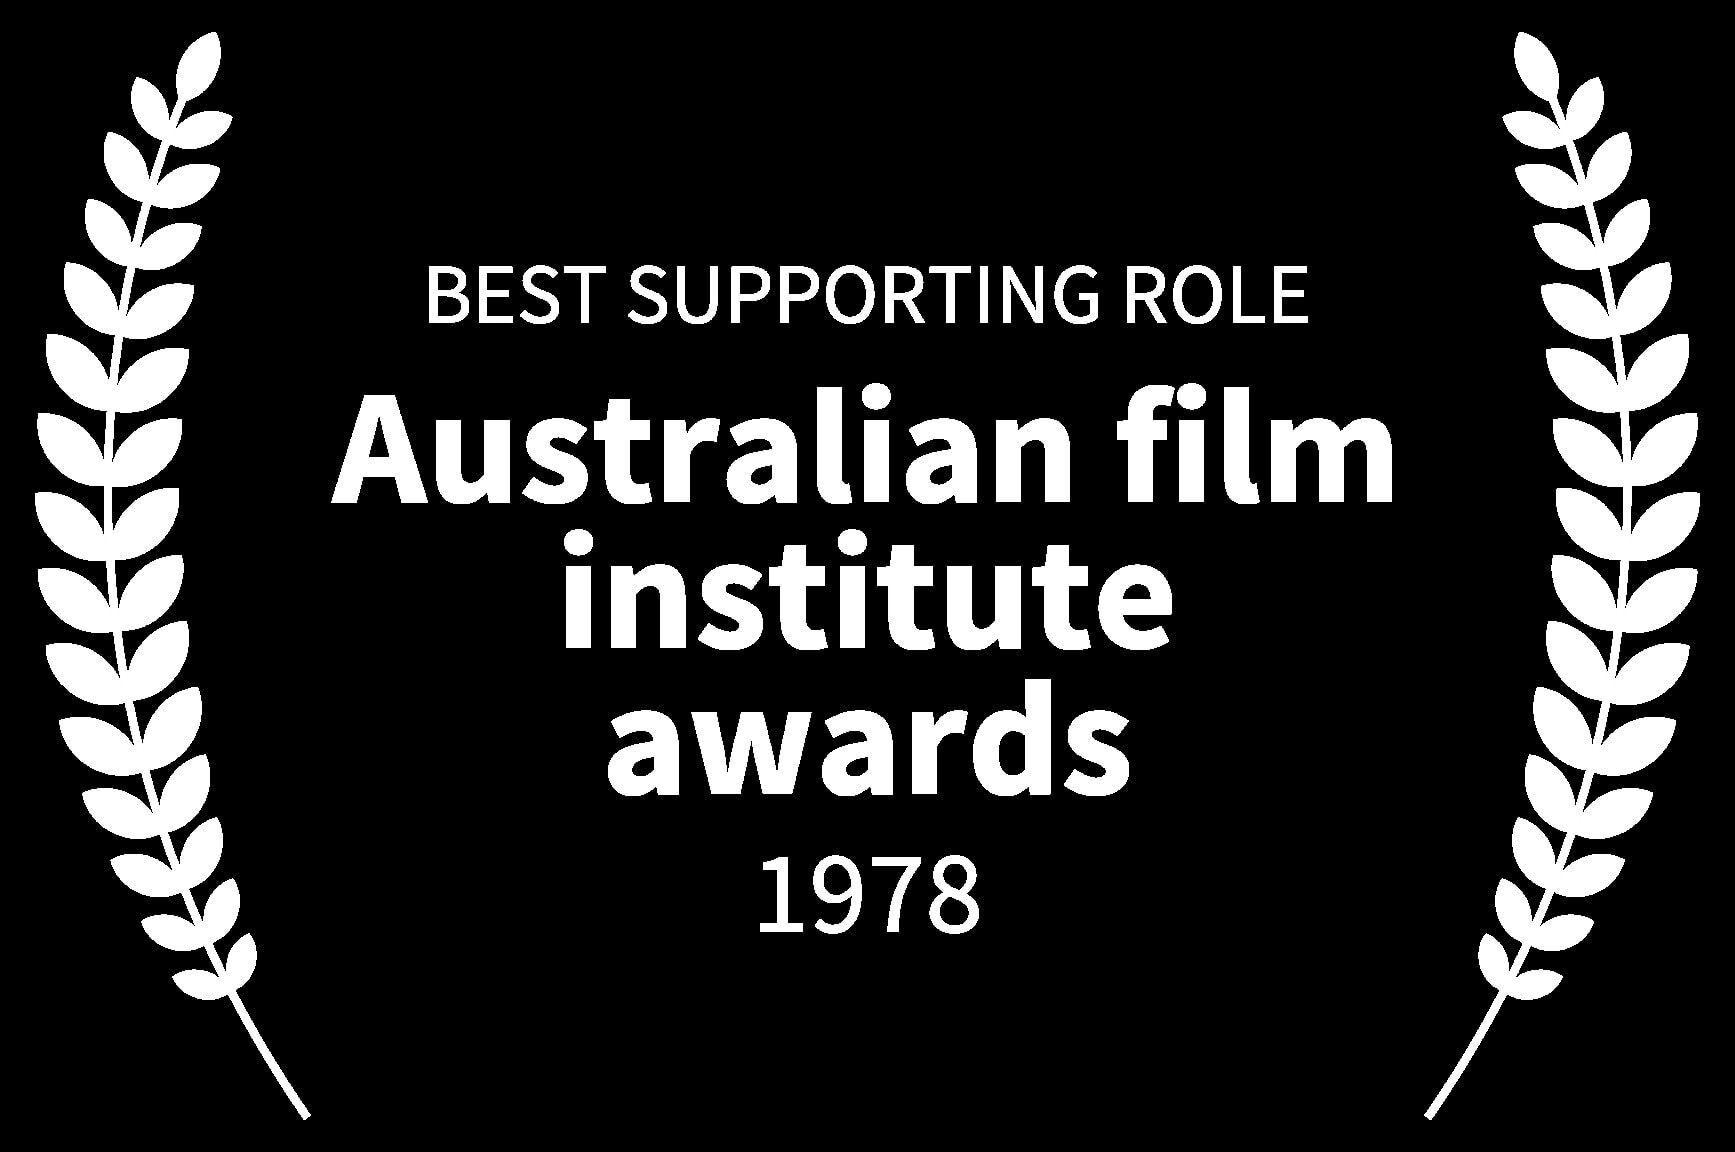 BEST SUPPORTING ROLE - Australian film institute awards - 1978 - The Mango Tree